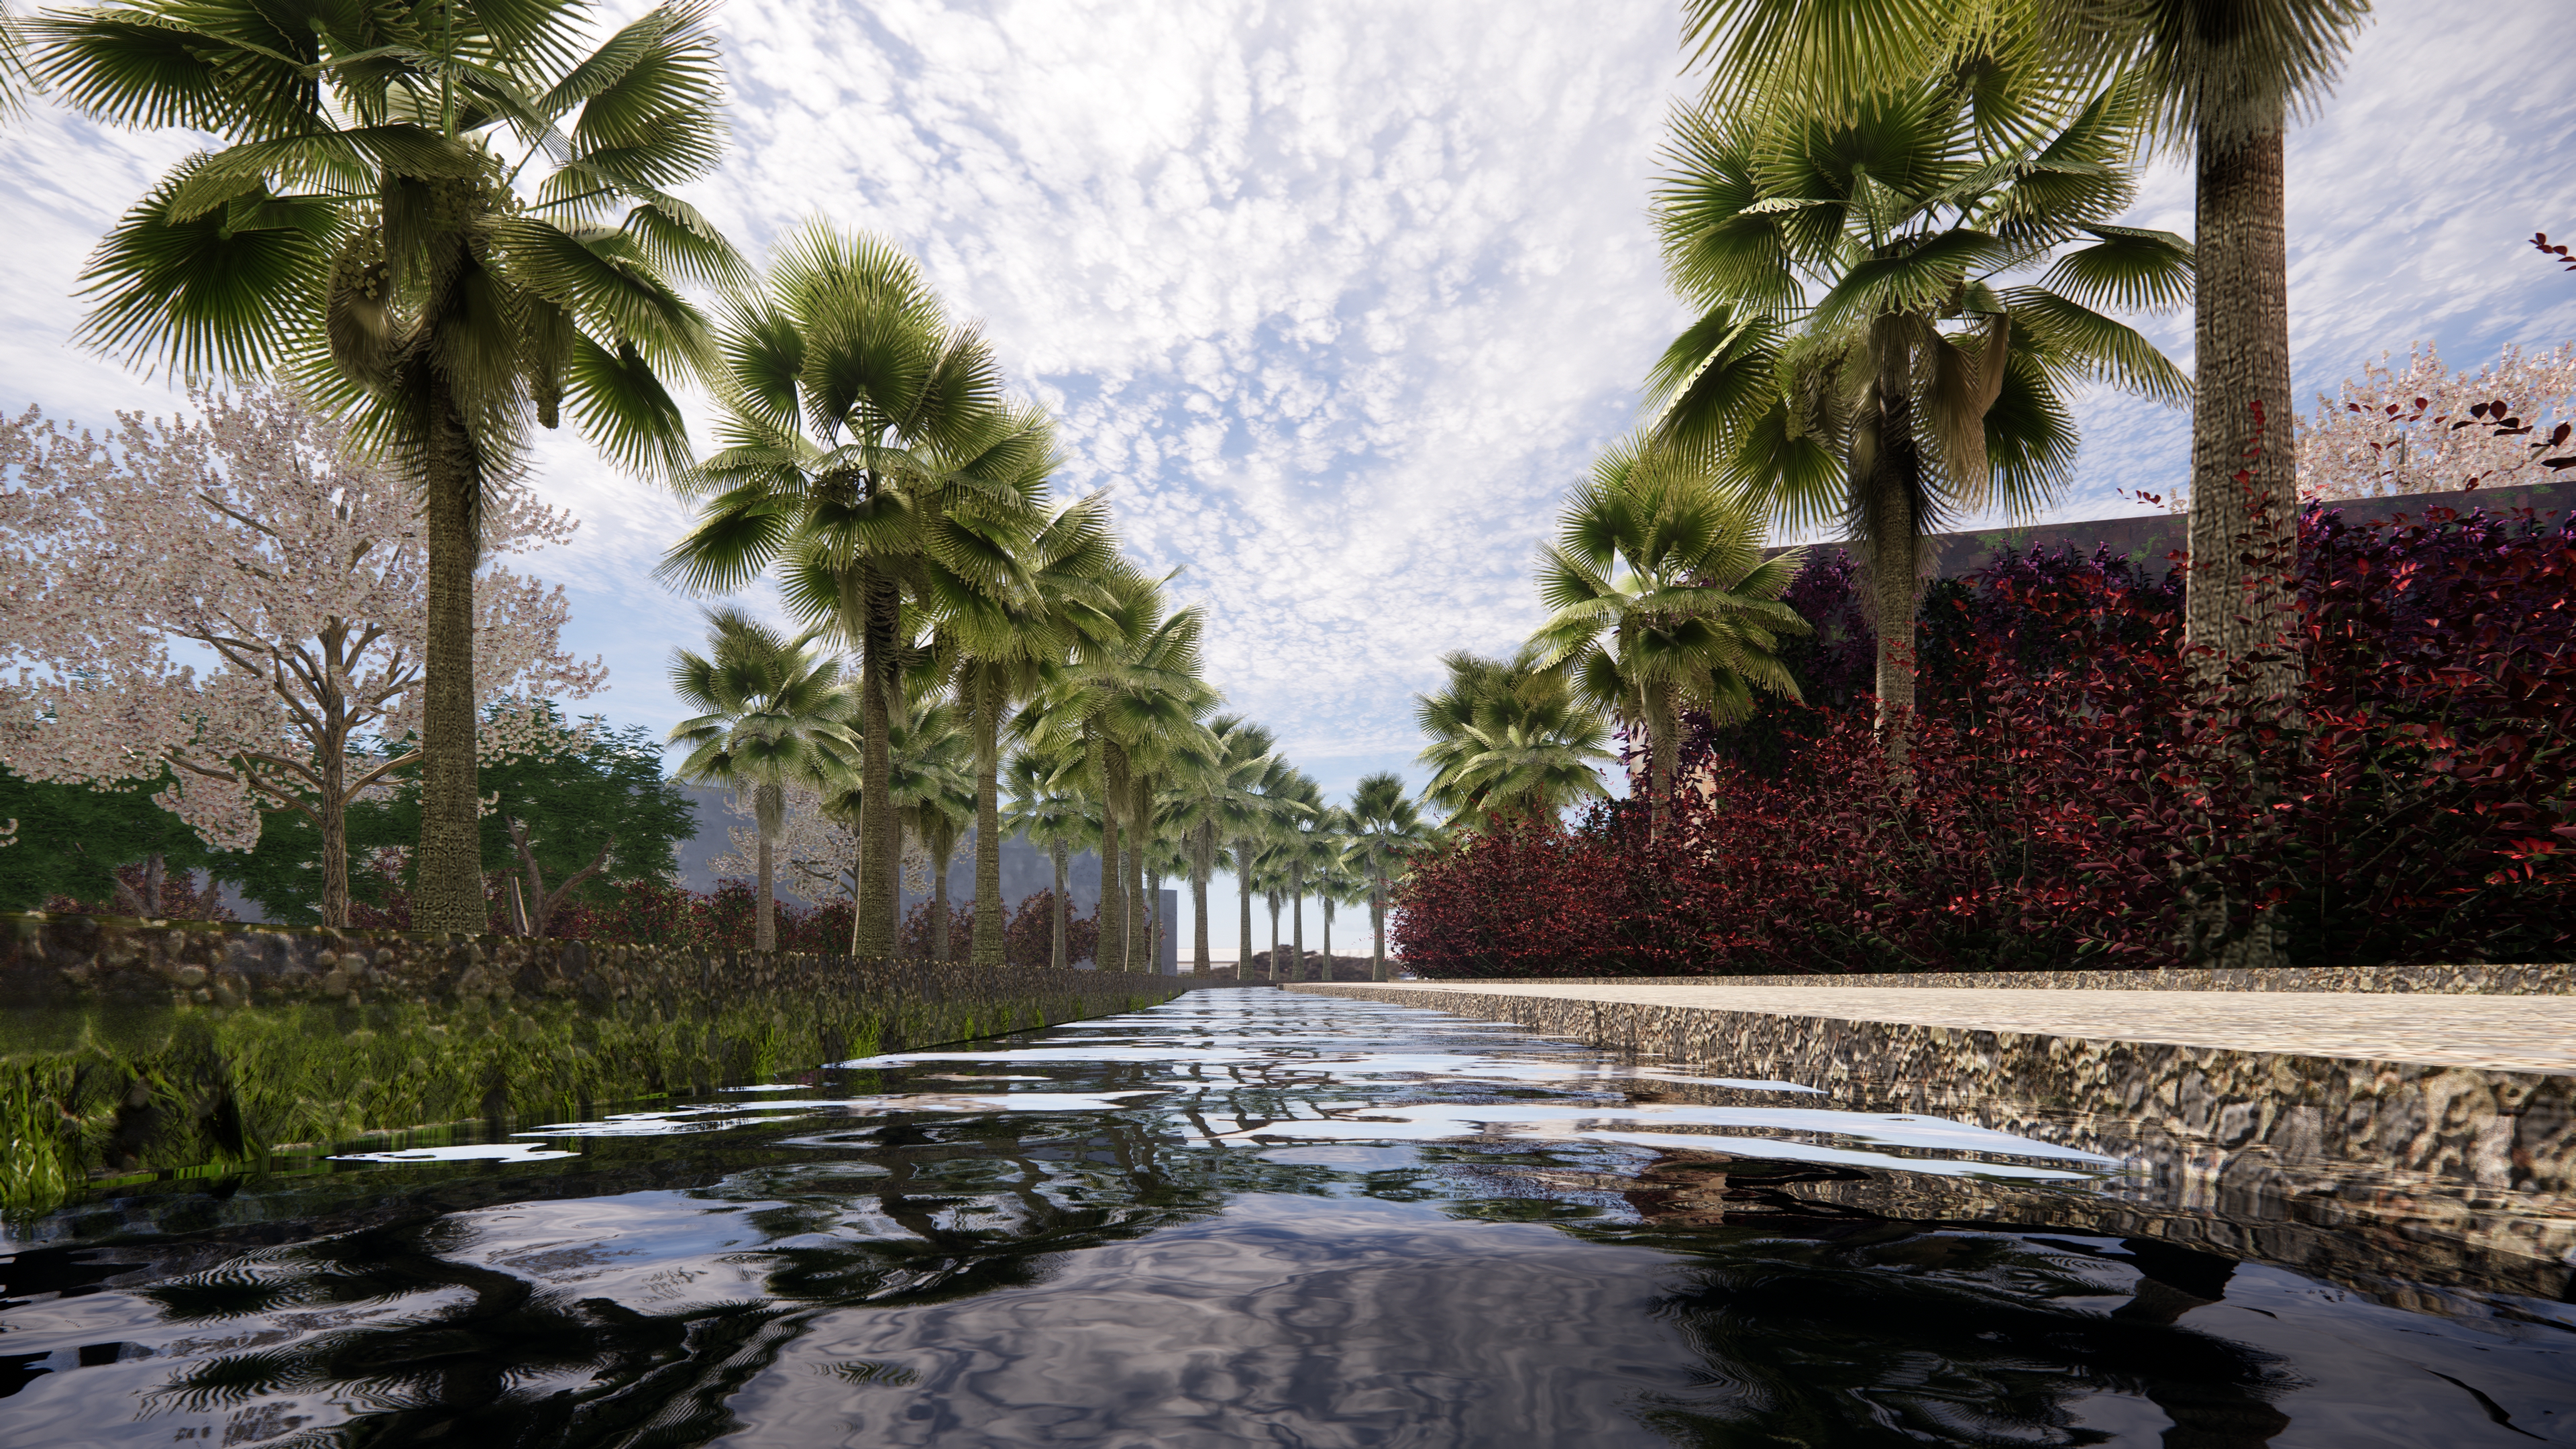 Water mirror with palm trees